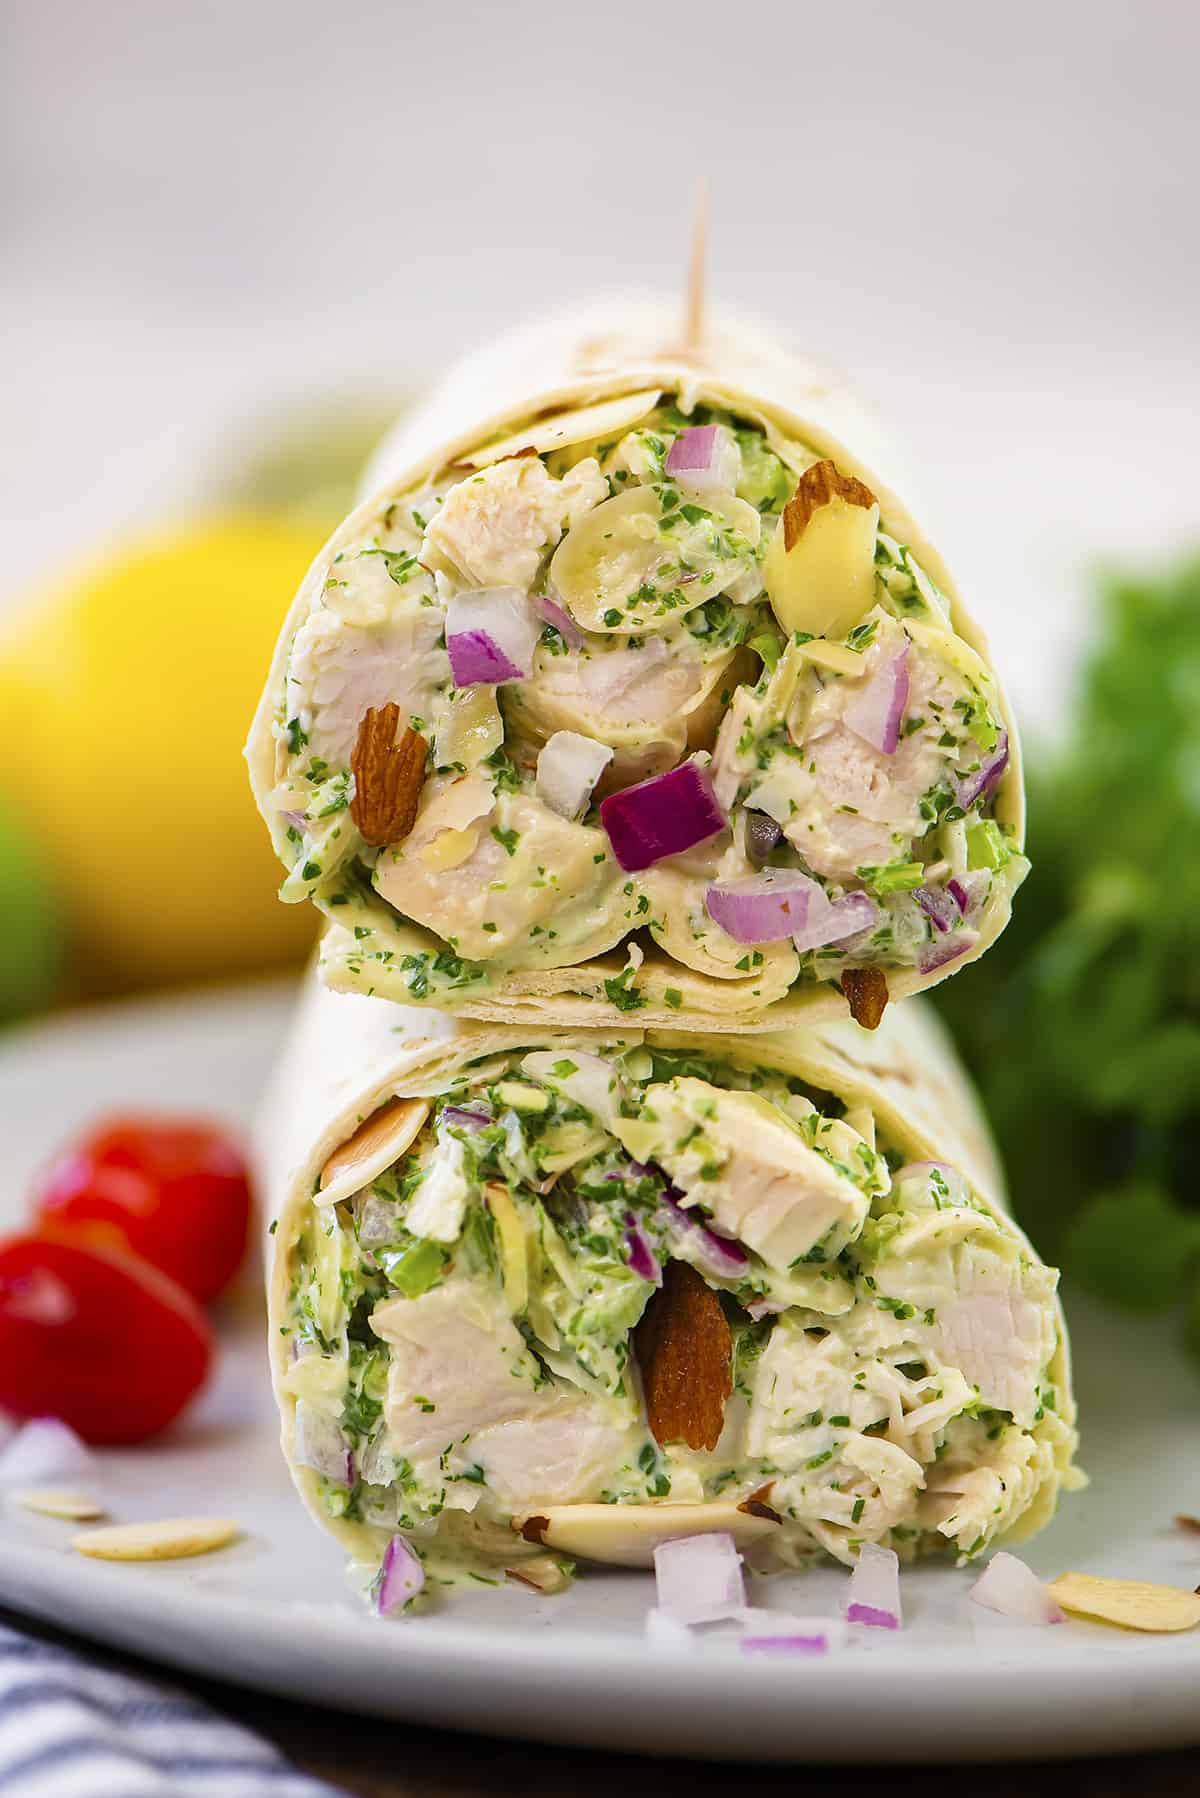 Chicken salad wrapped in a tortilla on plate.